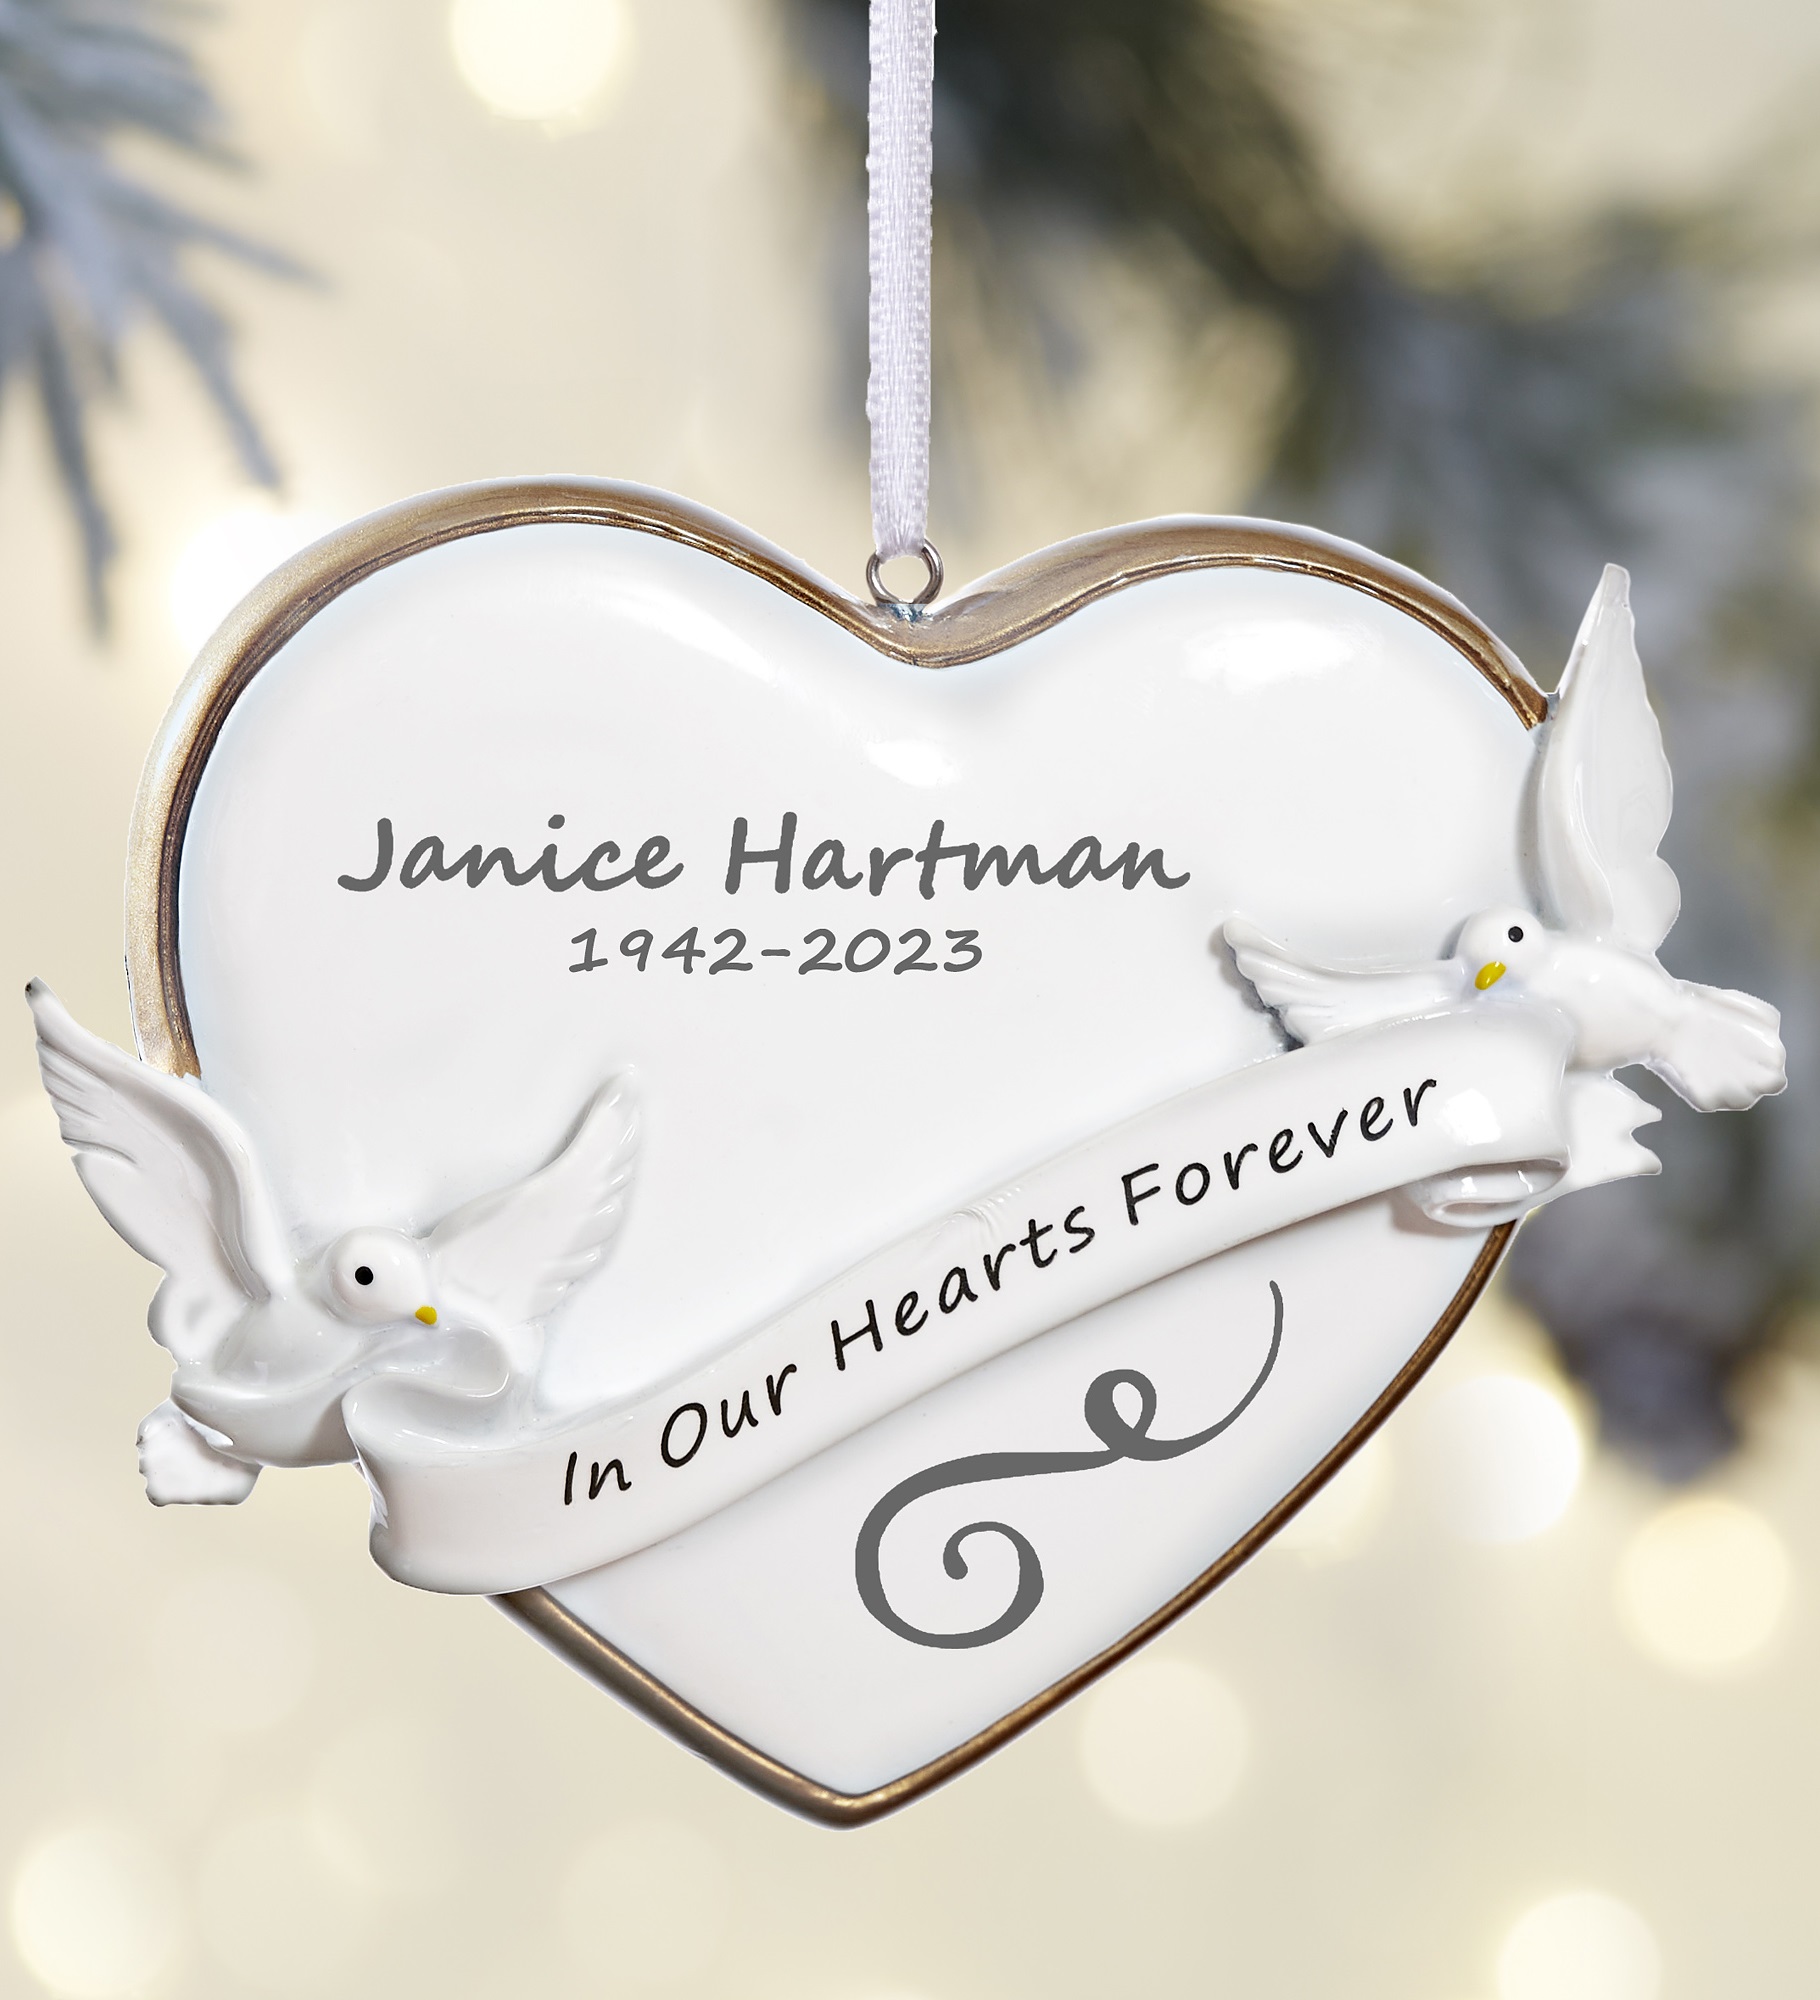 In Our Hearts Forever Personalized Memorial Ornament